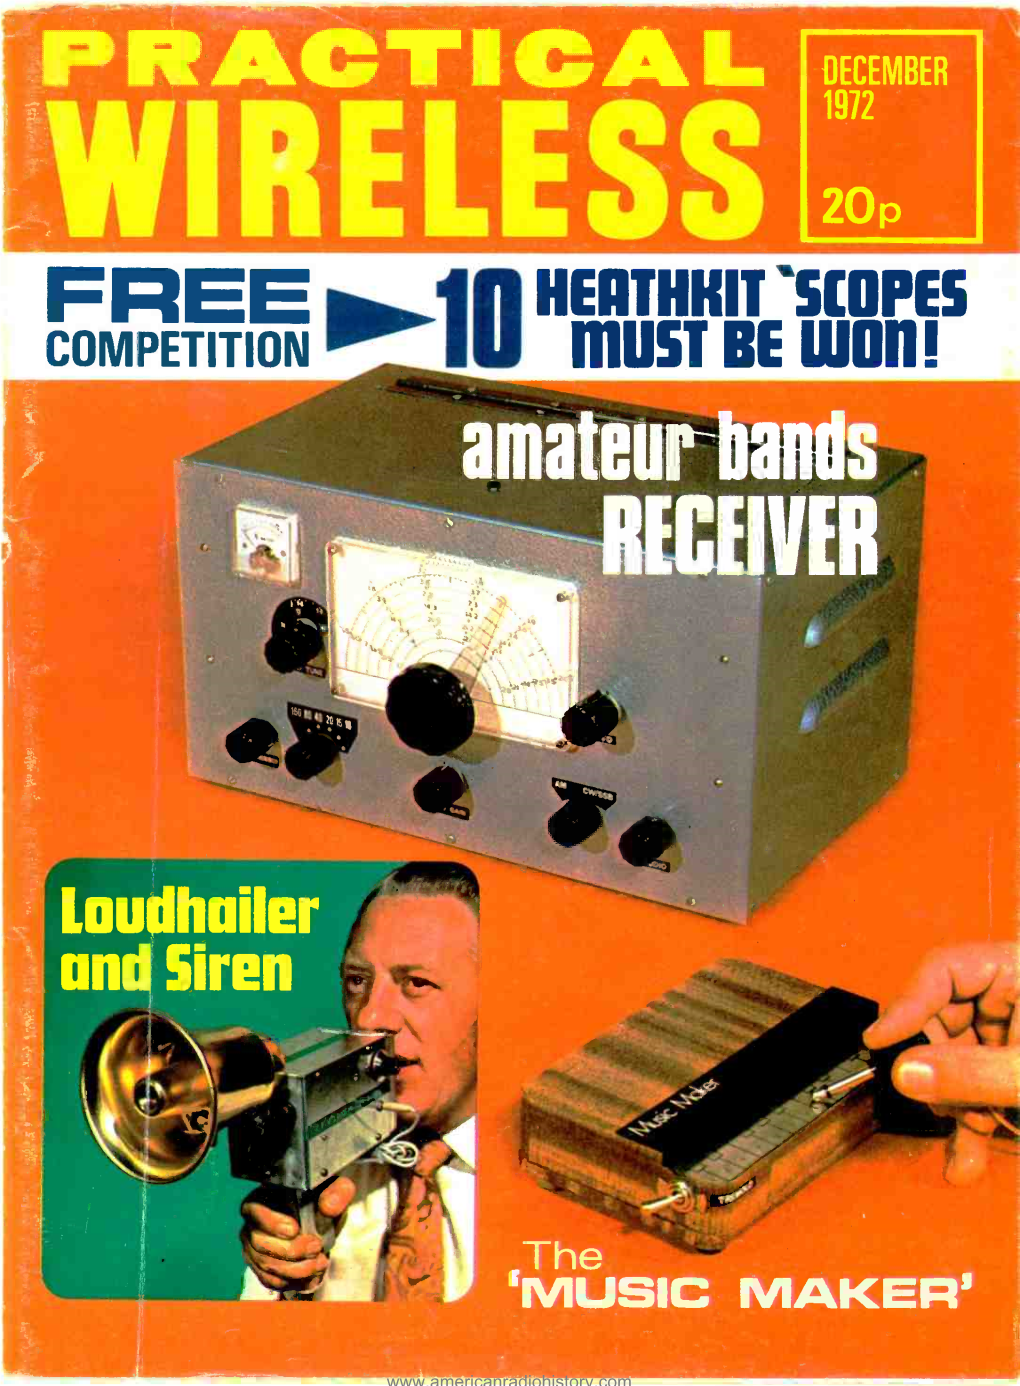 RELESS 20P FREE SCOPES COMPETITION 111 Heatmillmusi BE Um M